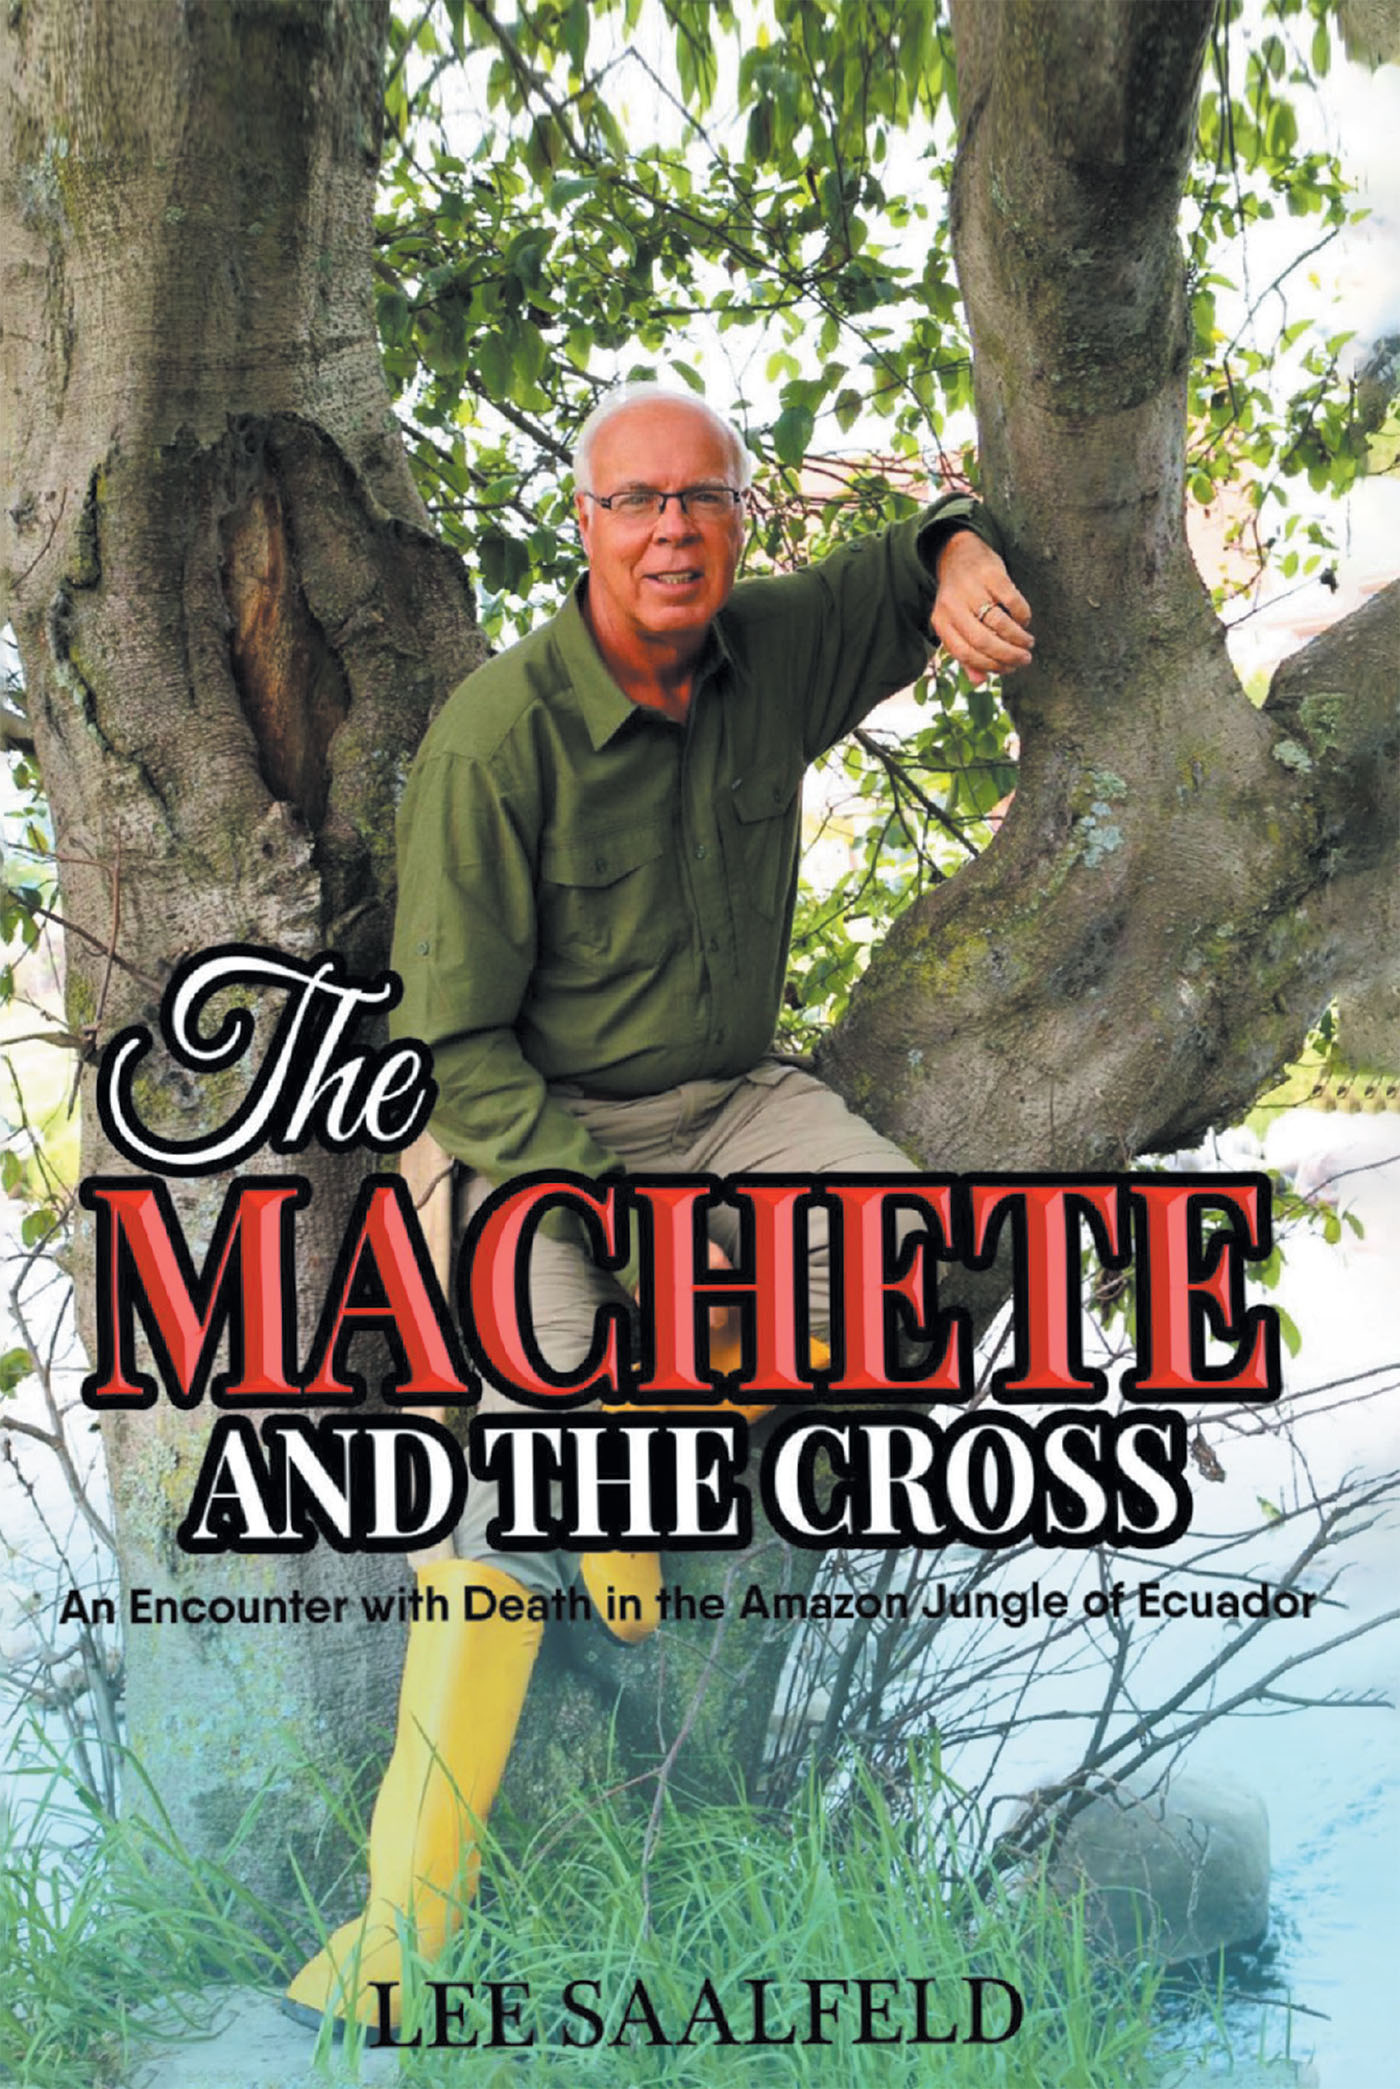 Lee Saalfeld’s Newly Released “THE MACHETE AND THE CROSS: An Encounter with Death In the Amazon Jungle of Ecuador” is a Riveting Tale of Faith and Survival